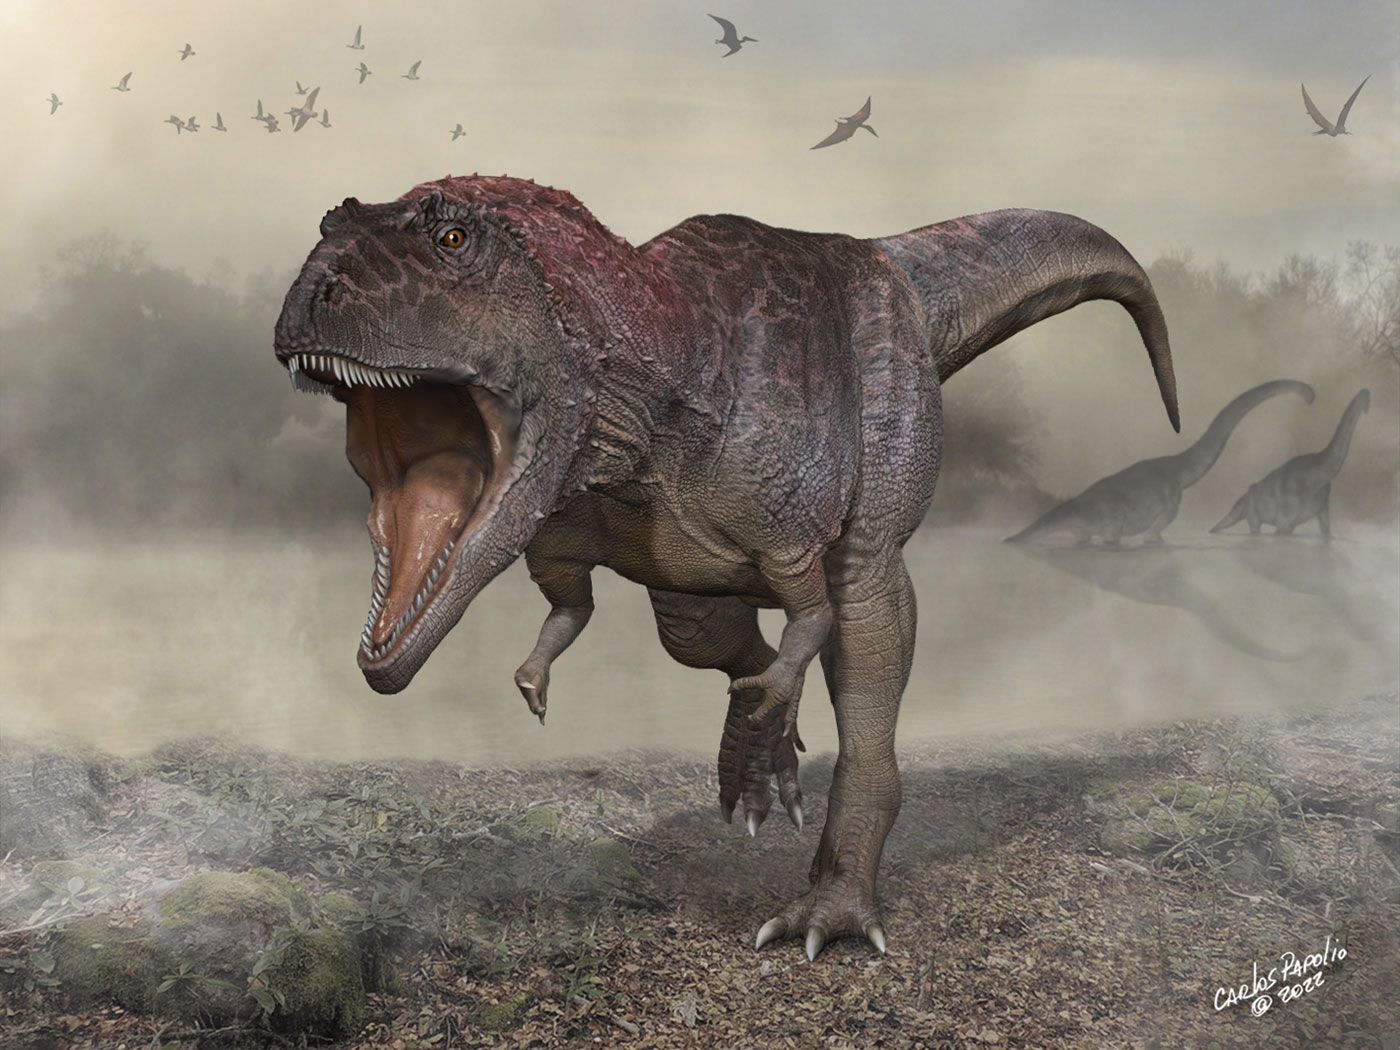 Paleontologists Uncover New Dinosaur With Tiny Arms Like T. Rex